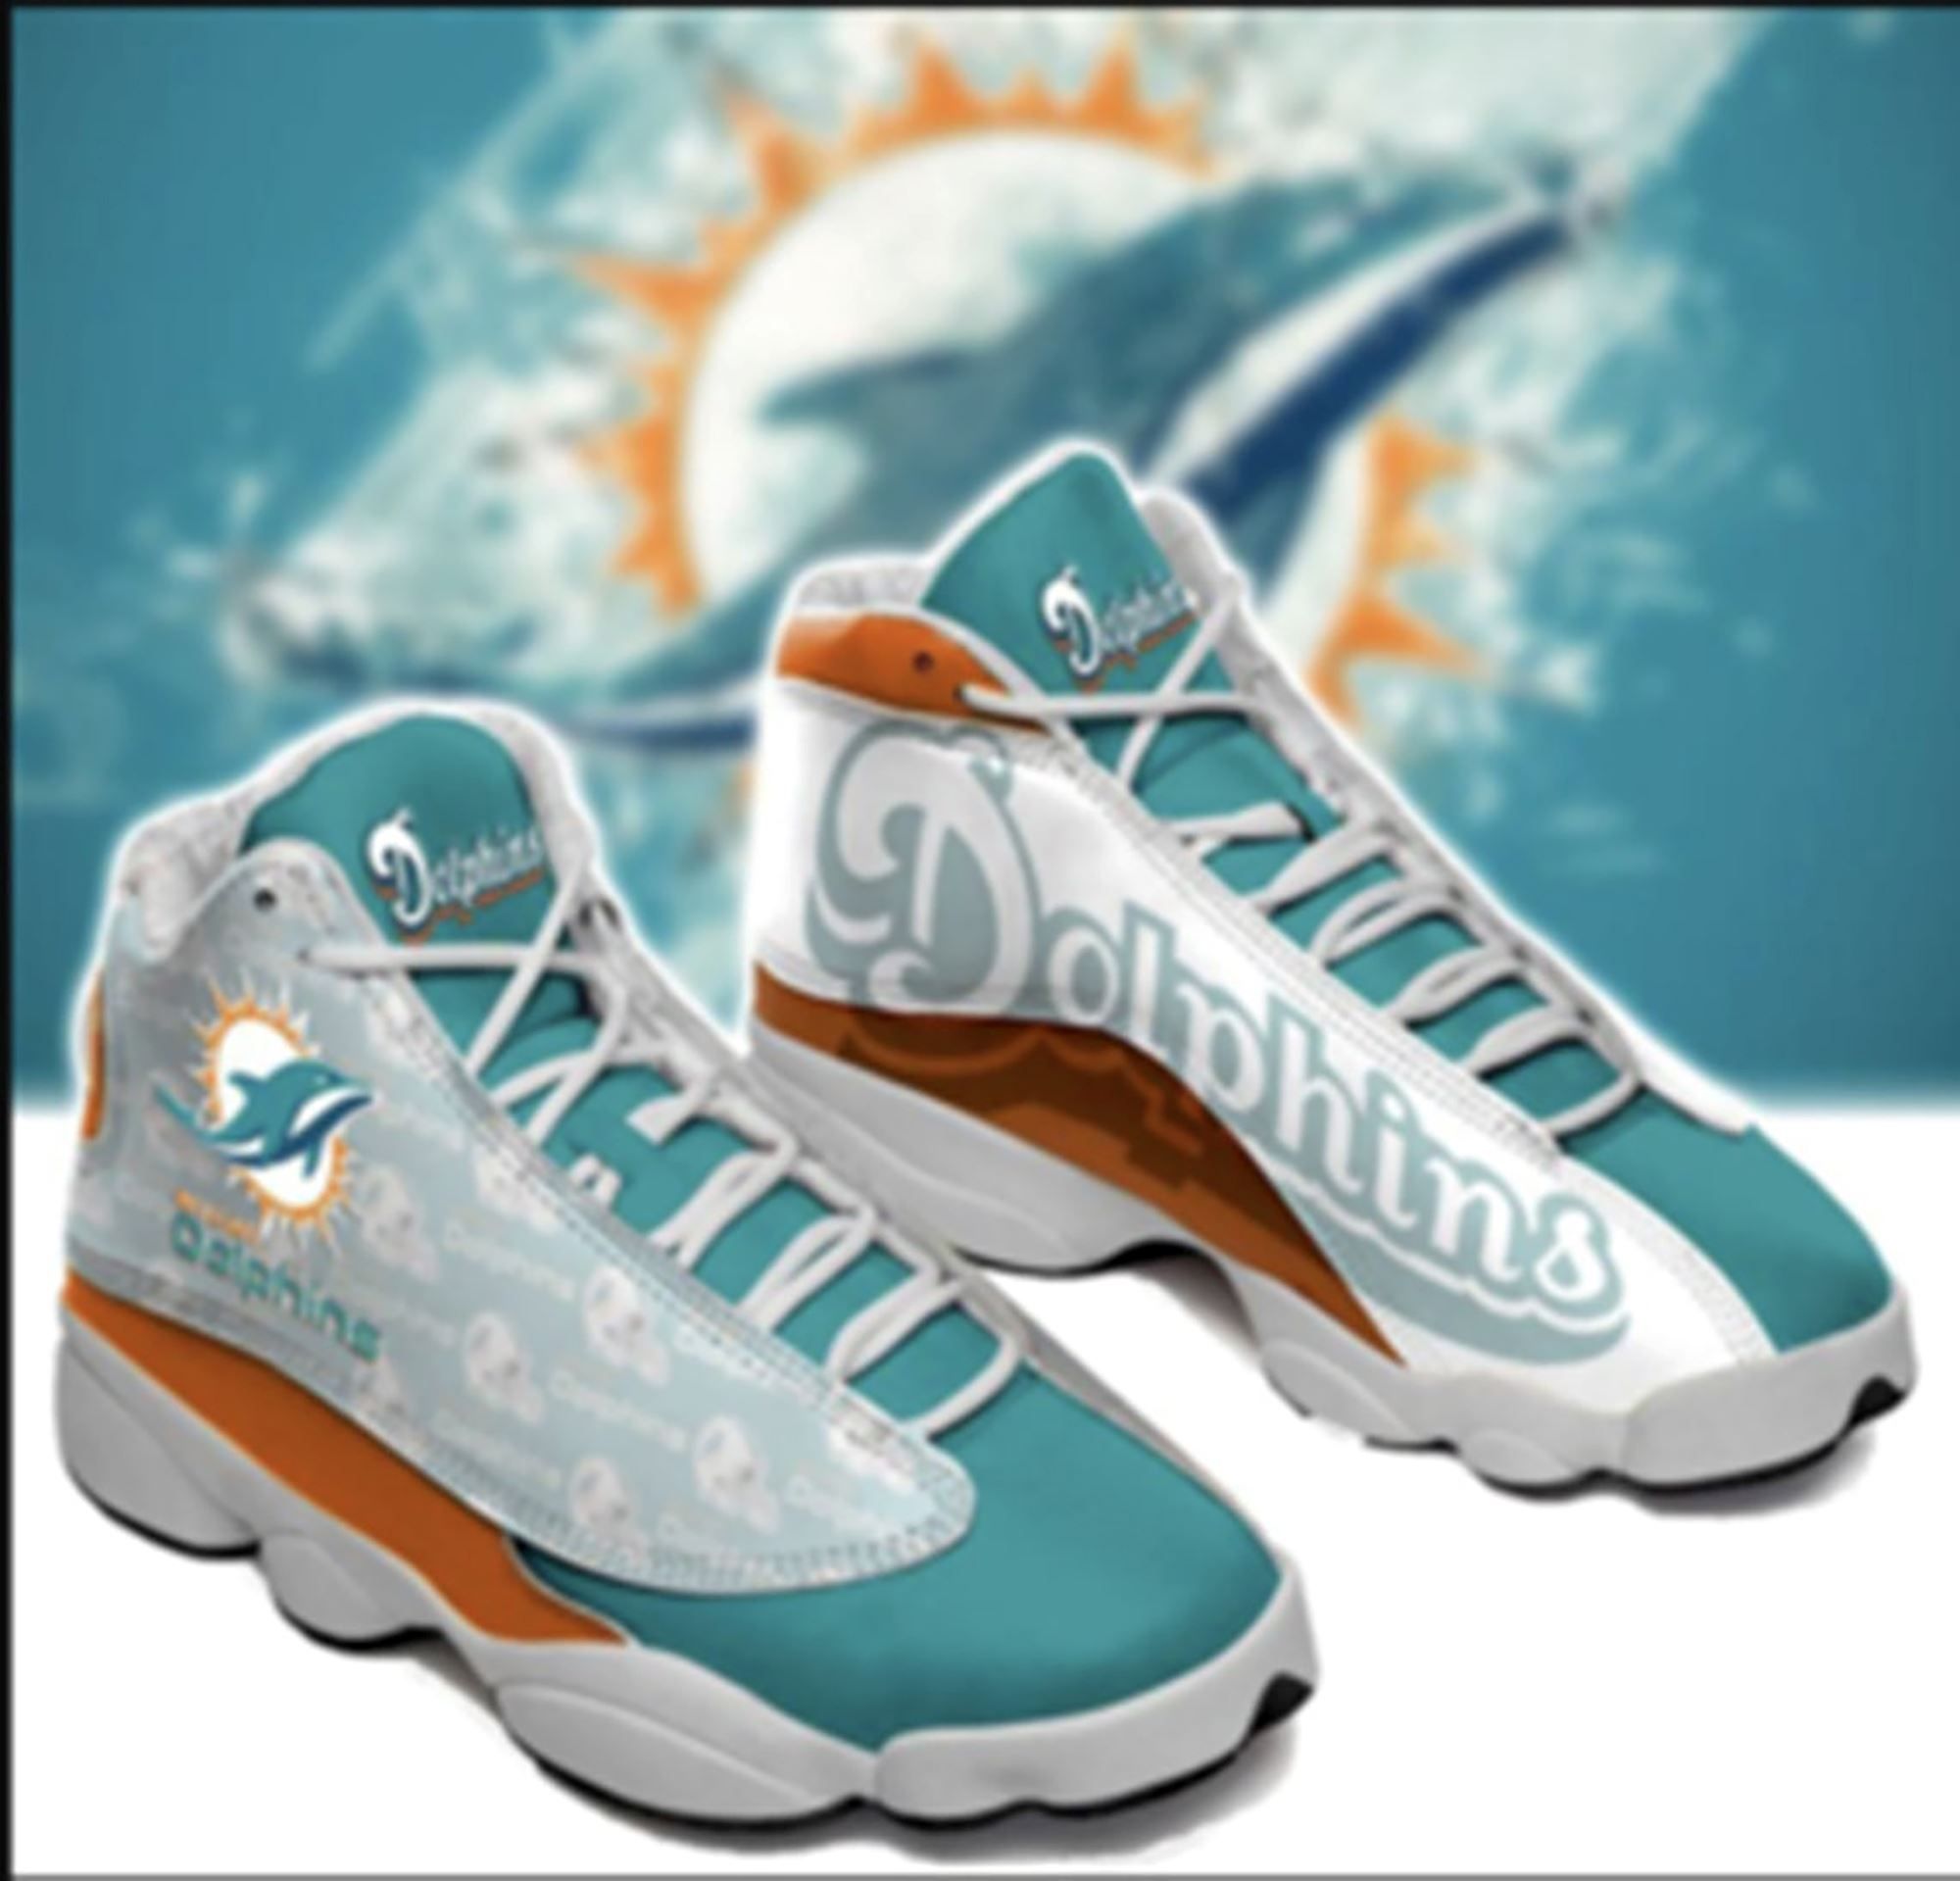 Miami dolphins air jordan 13 sneakers sport shoes unisex shoe gift birthday gift for the fans gift for him and her - 1:1 - men / us 6.5